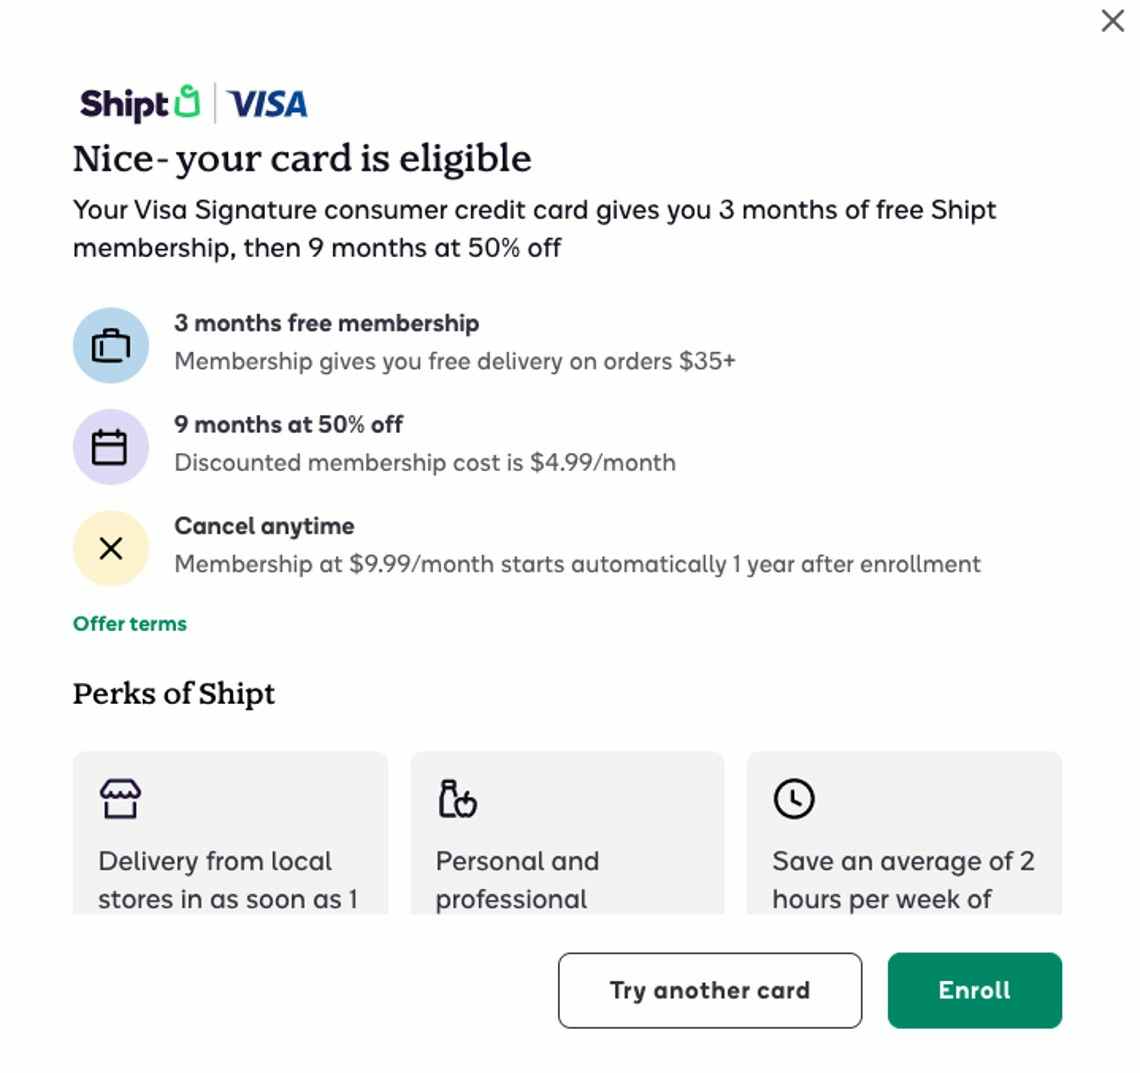 Visa Credit Cardholders, You Qualify for up to Three Years of Free